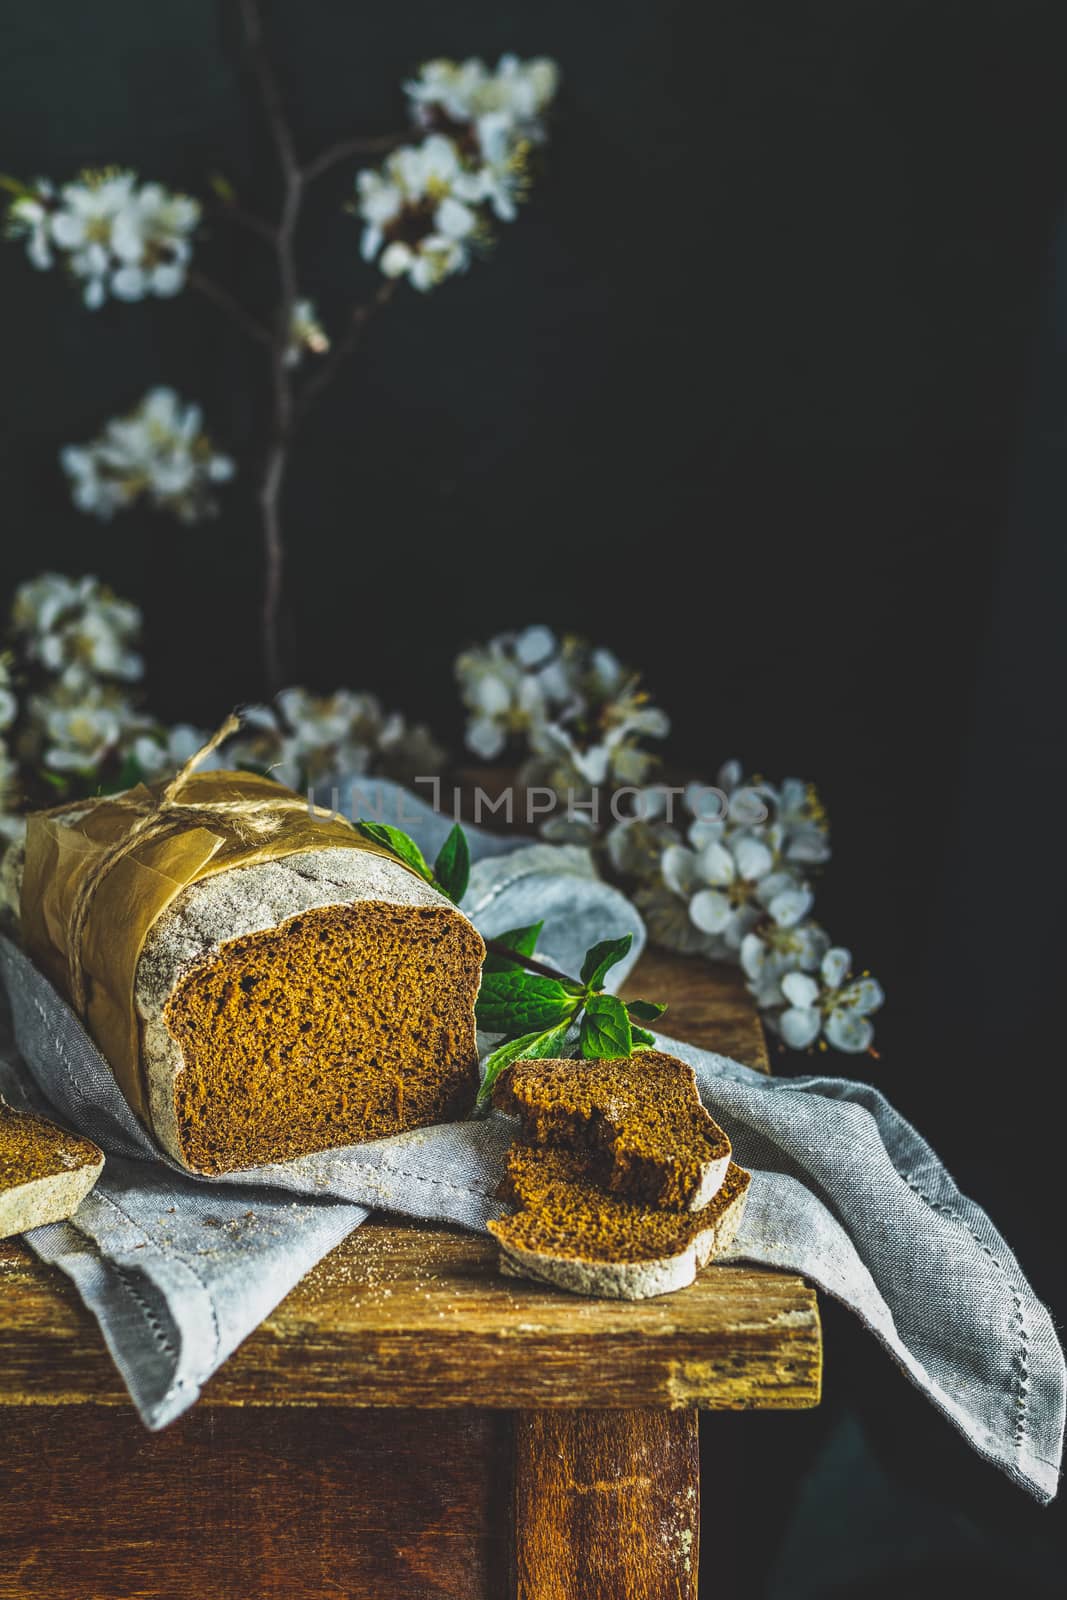 Sliced freshly baked rye handmade breads on old wooden table with linen napkin and apricot tree blossom branch. Dark rustic style.